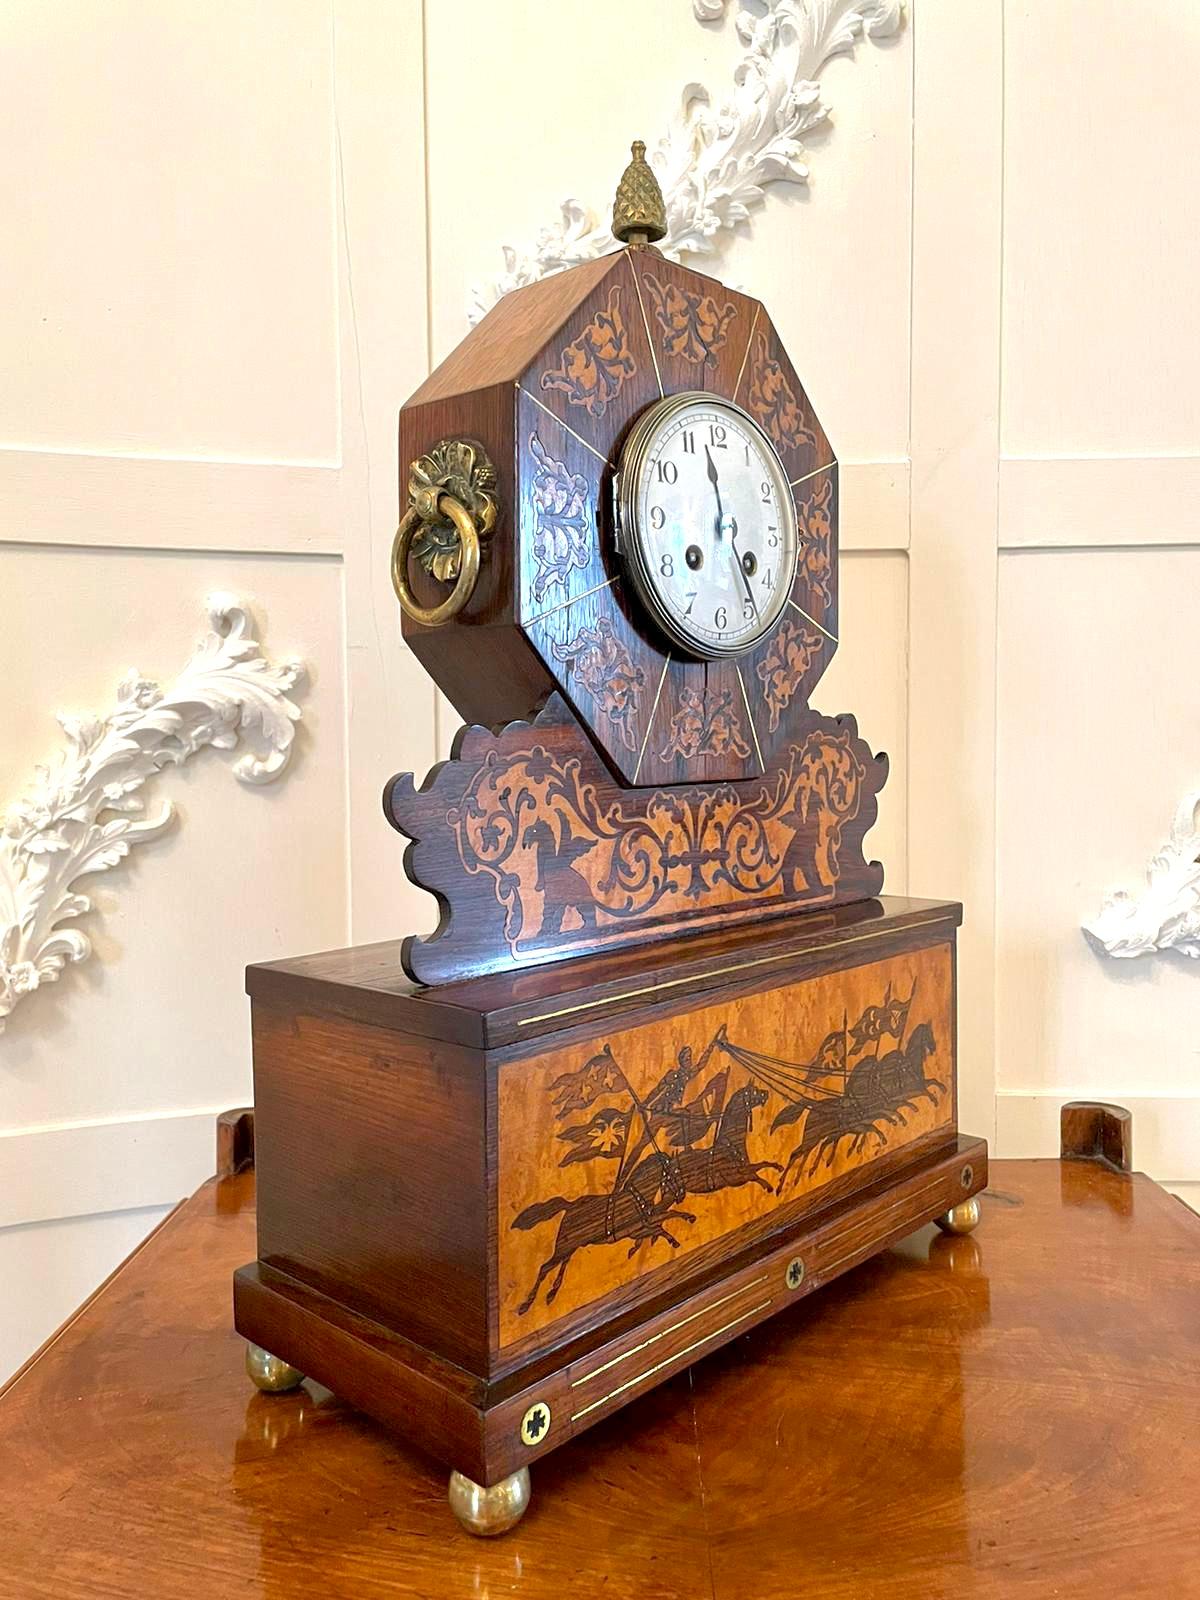 Fine antique Regency inlaid marquetry mantel clock having an outstanding inlaid marquetry case, octangular shaped top with pretty ornate brass mounts, brass bezel, porcelain dial with original hands, eight day movement striking on the hour and half